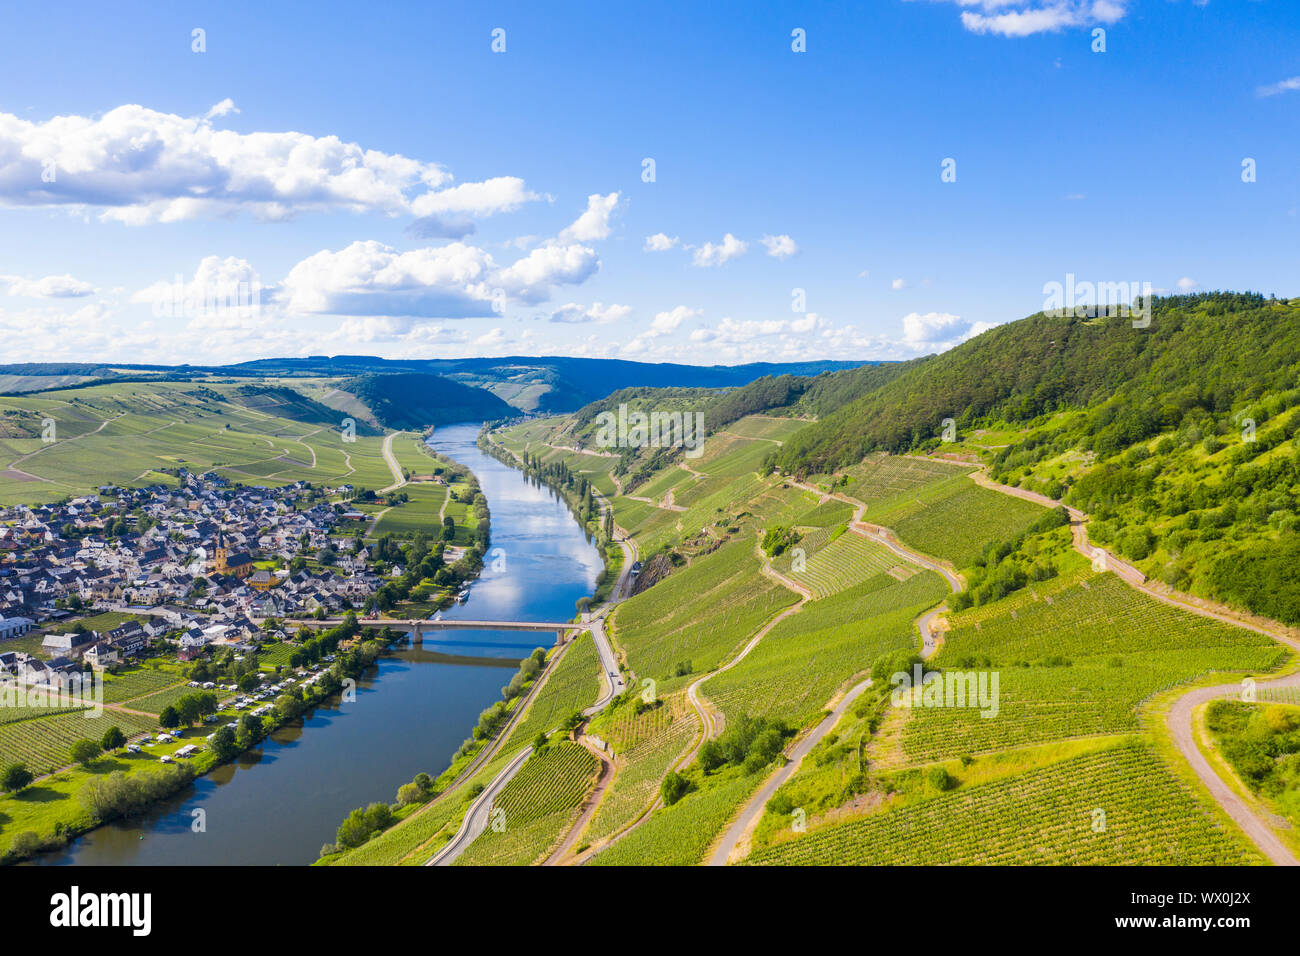 The Moselle at Trittenheim, Moselle Valley, Rhineland-Palatinate, Germany, Europe Stock Photo